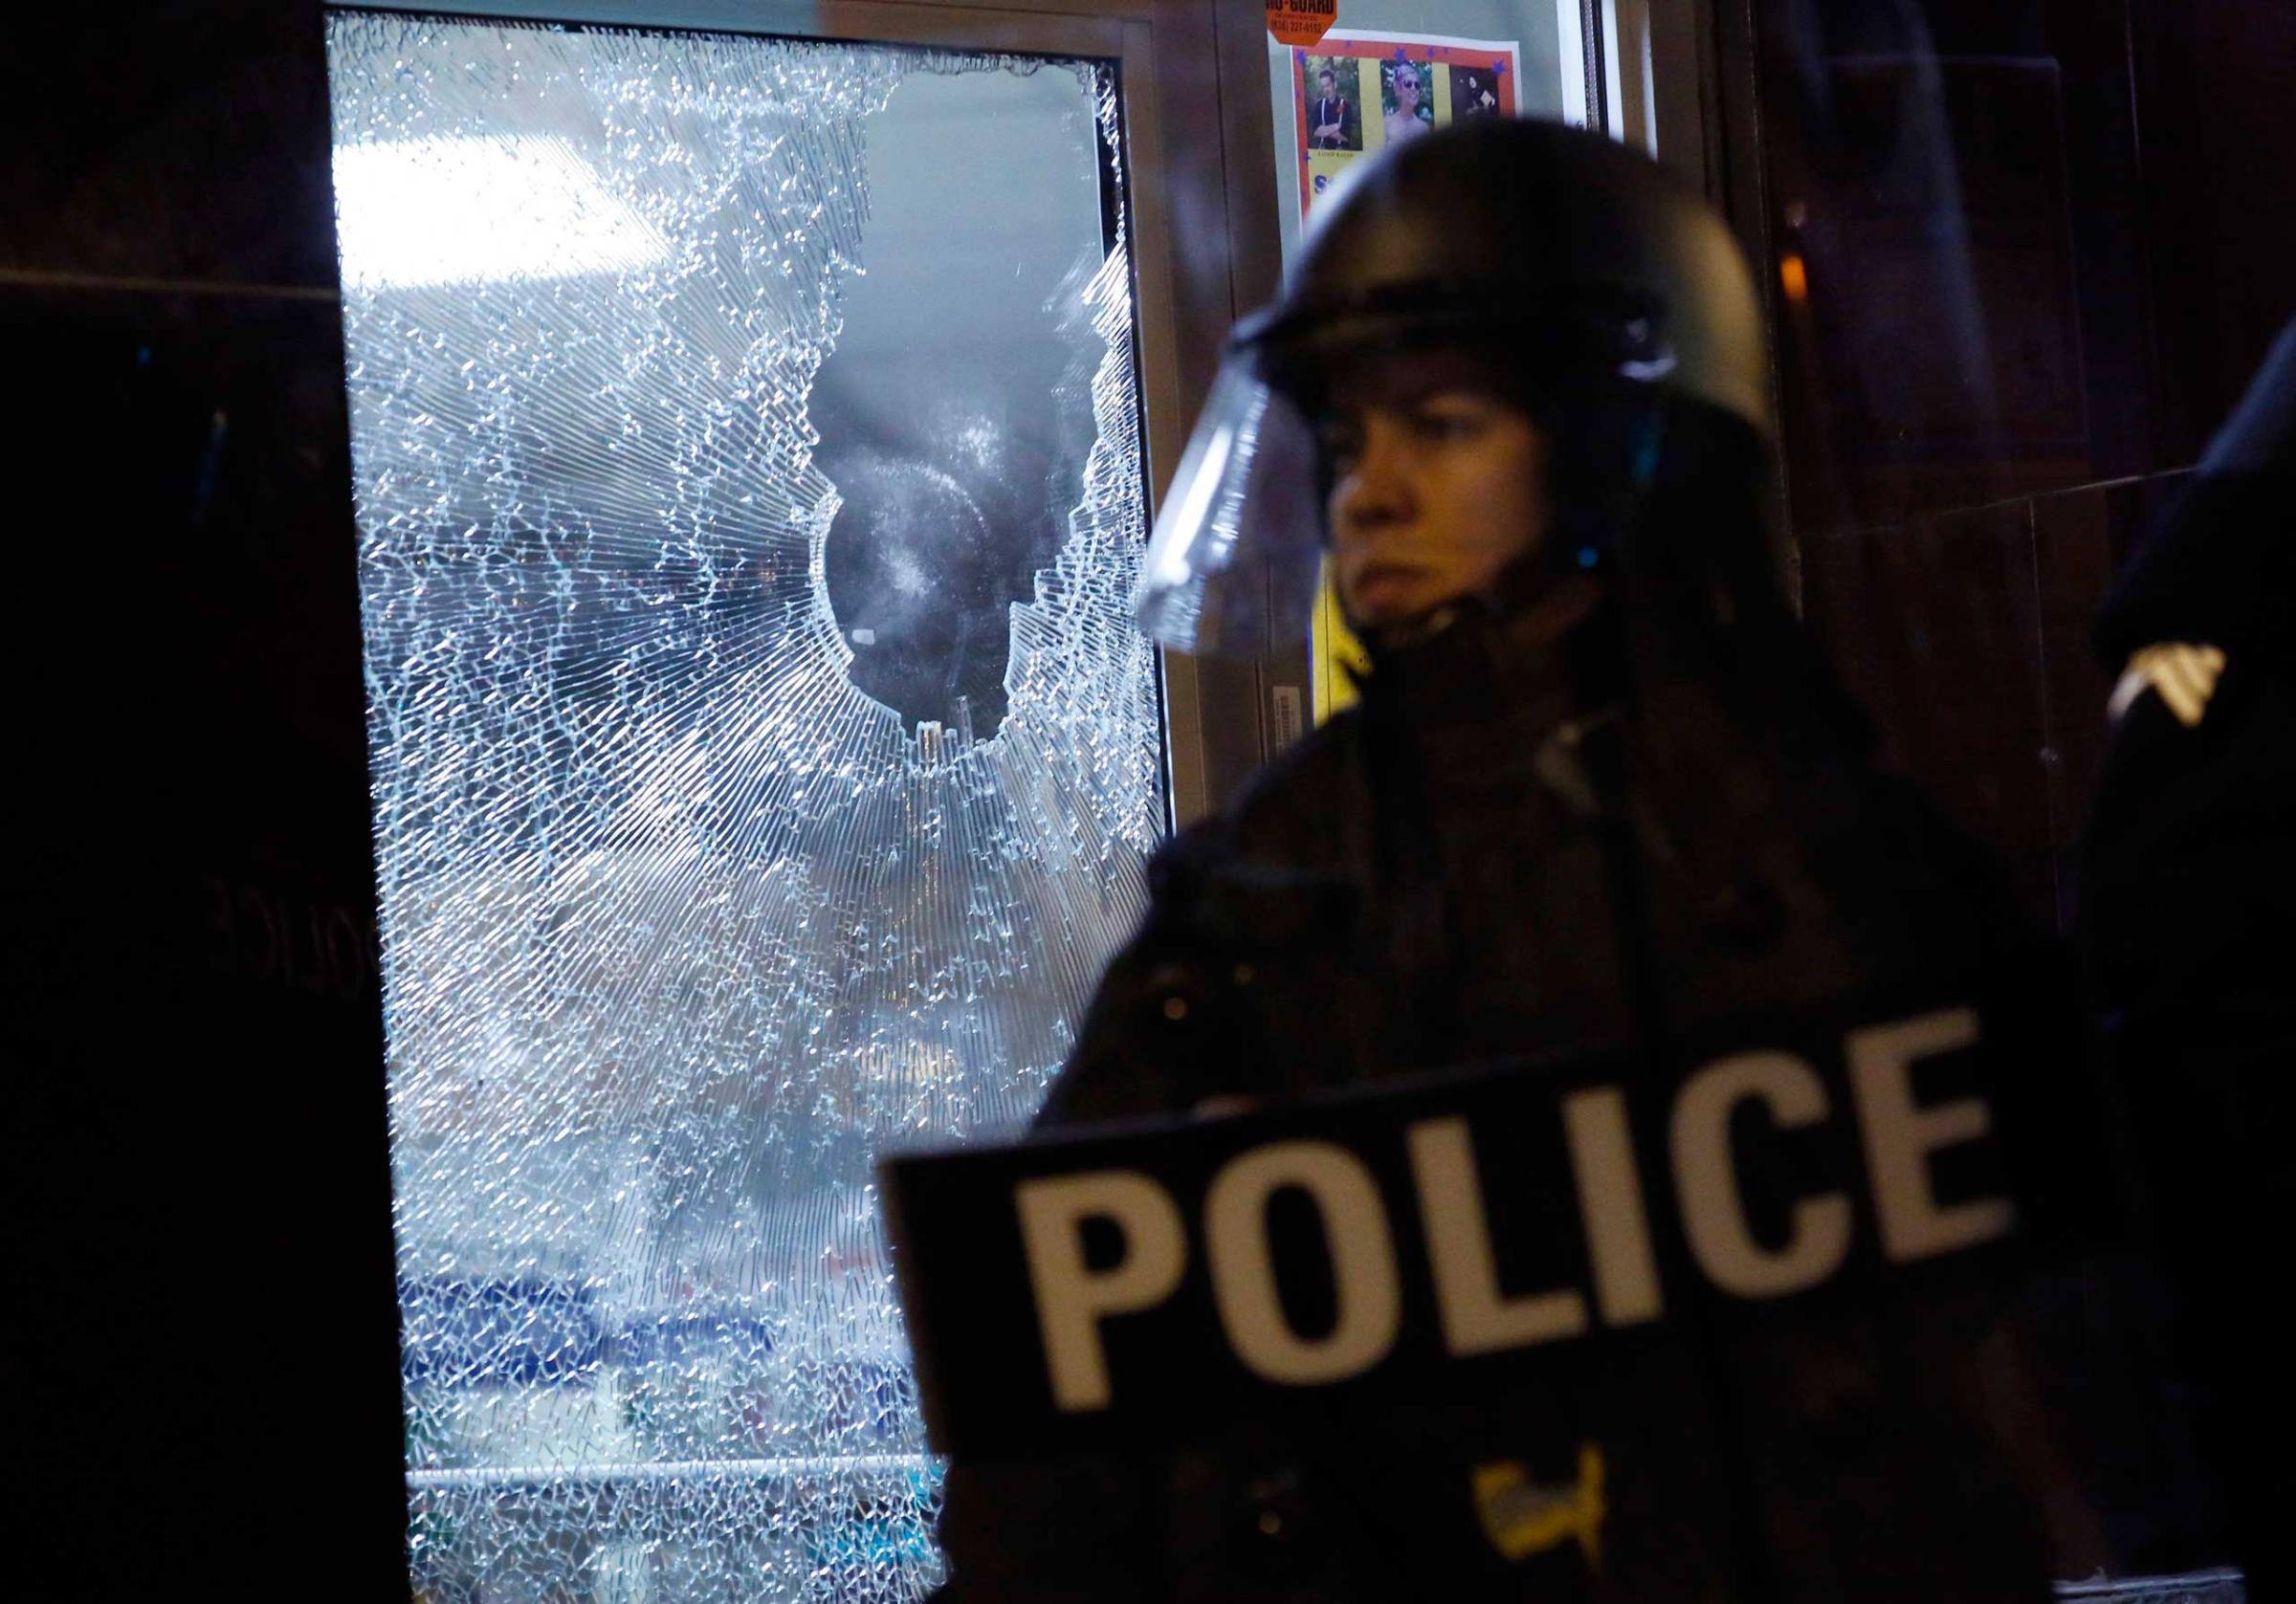 Police officer stands guard in front of a damaged storefront during a protest after a vigil in St. Louis, Missouri